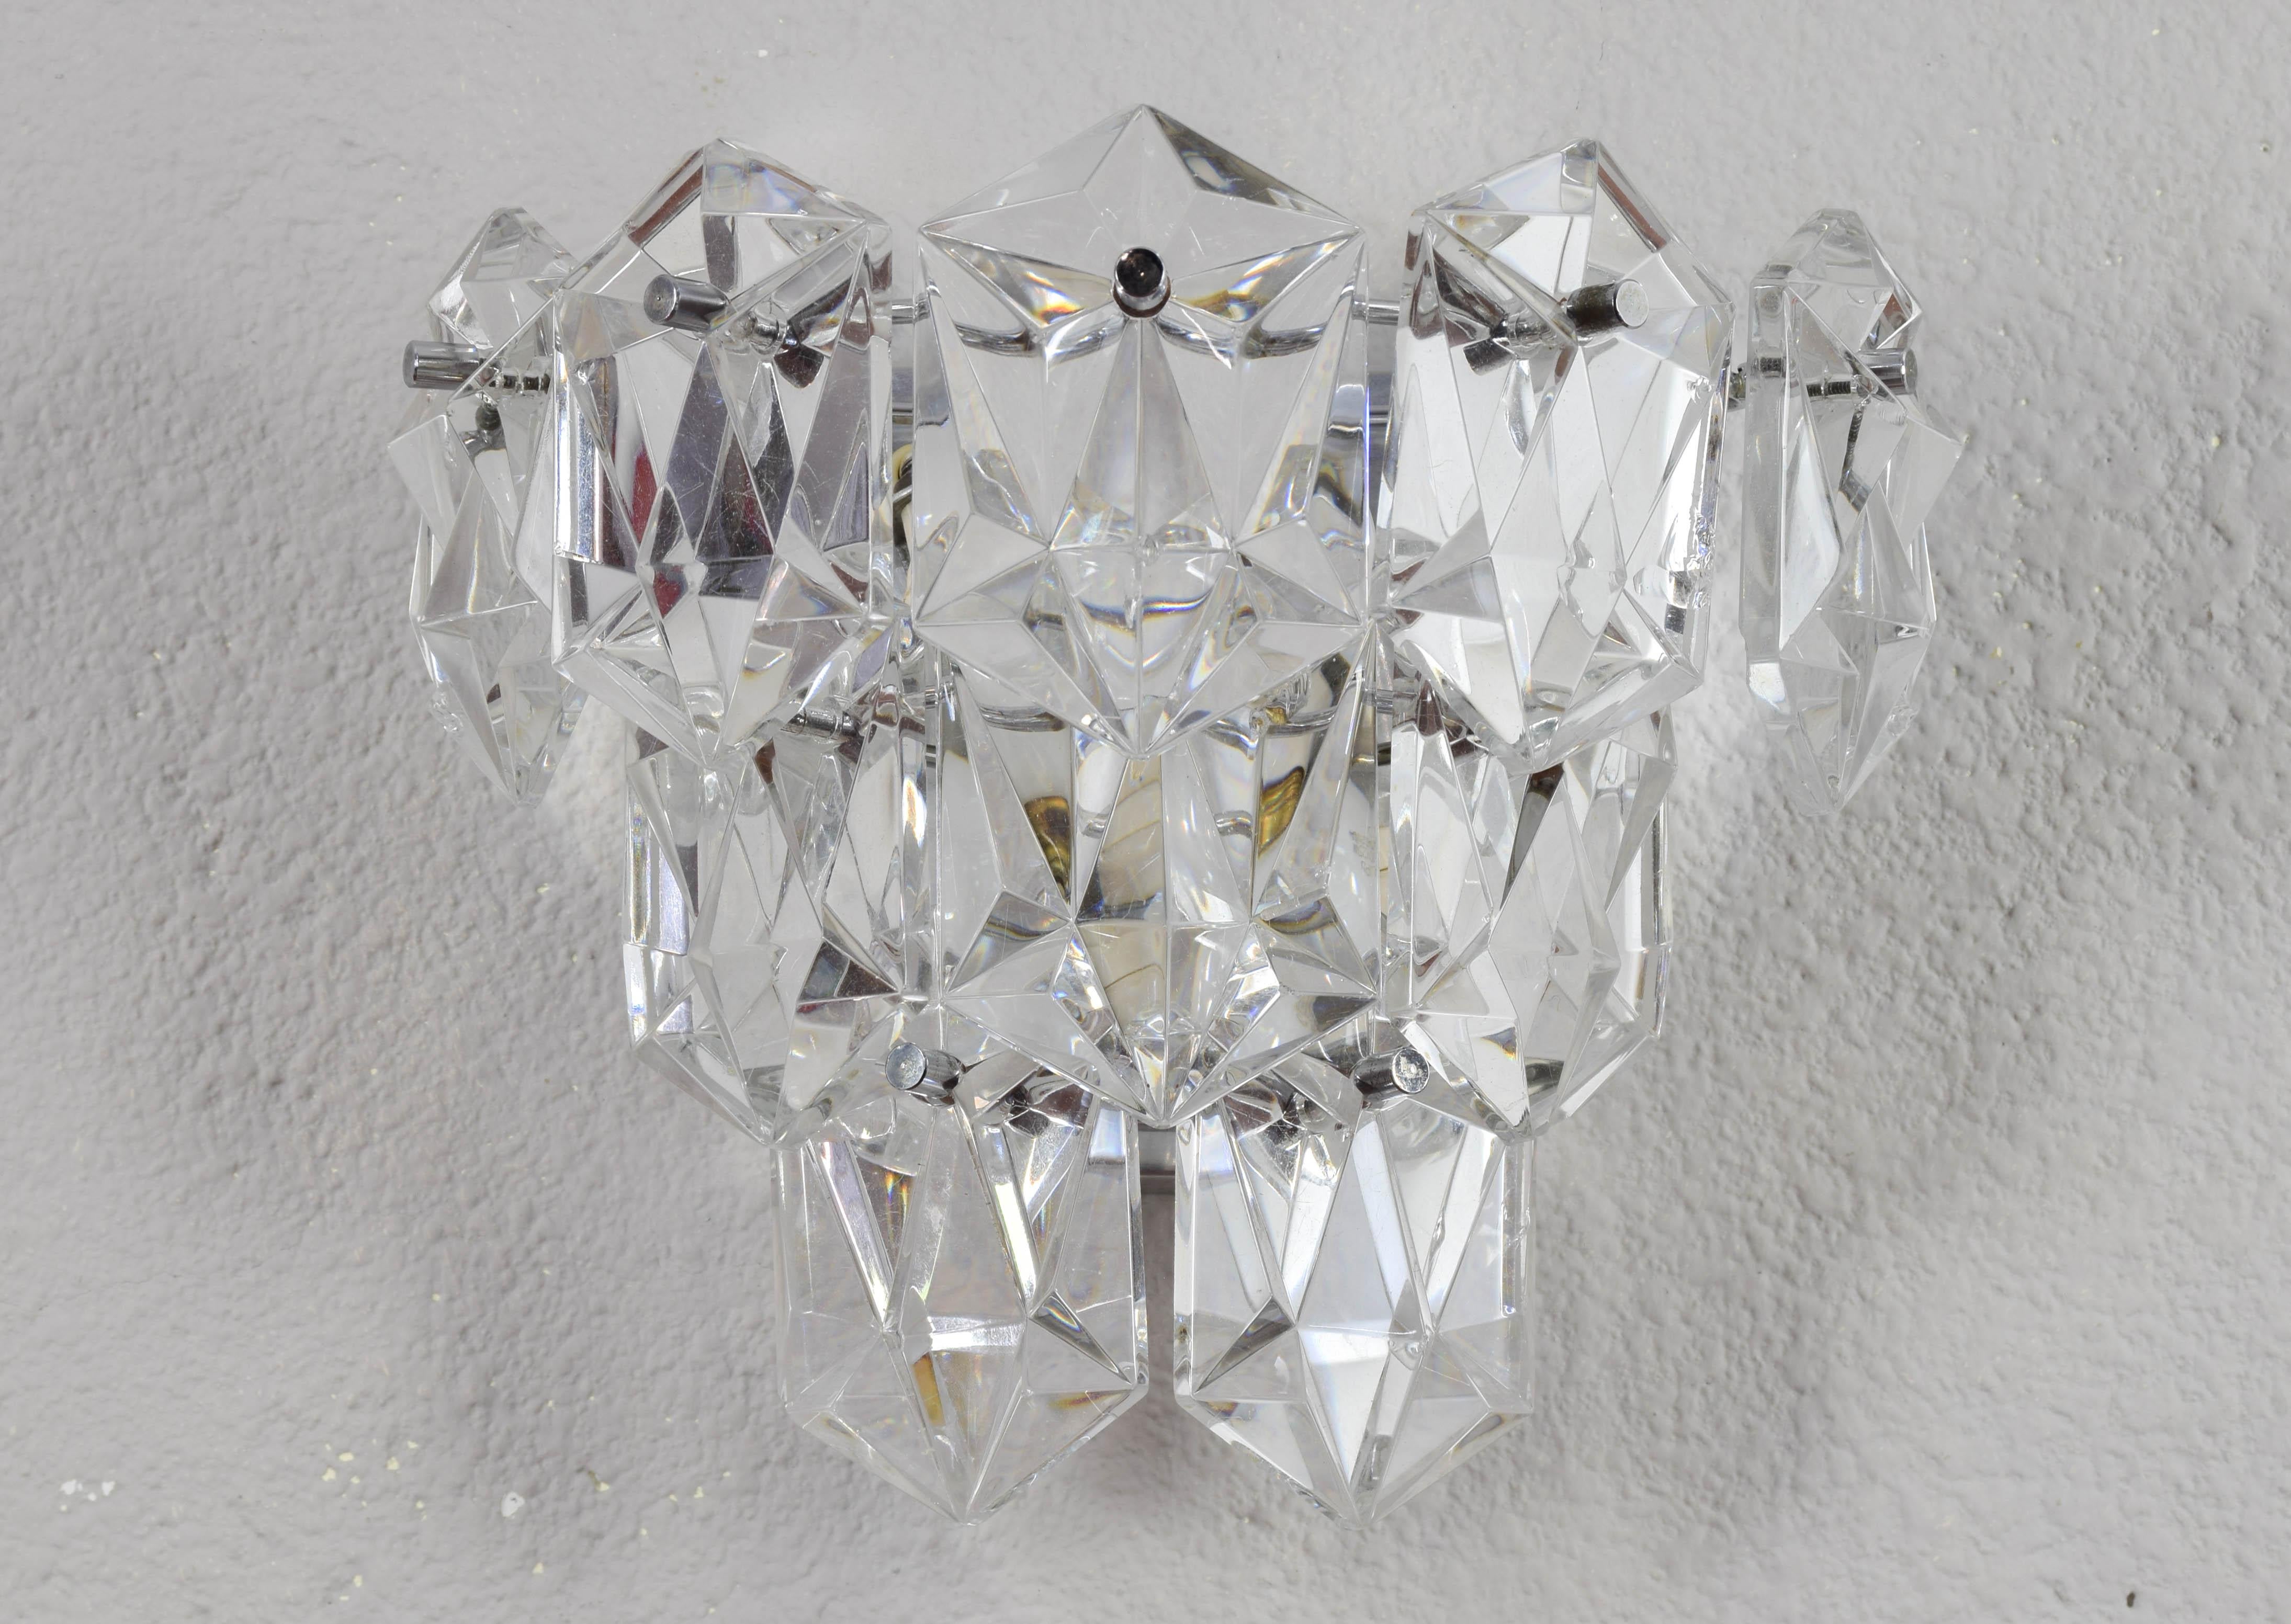 Kinkeldey wall light made in Germany in the 1960s. Chromed body and shiny gem-shaped crystals.
Ten pieces of glass distributed on three floors.
The crystals show signs of wear, although once installed they are hardly noticeable (see the images in